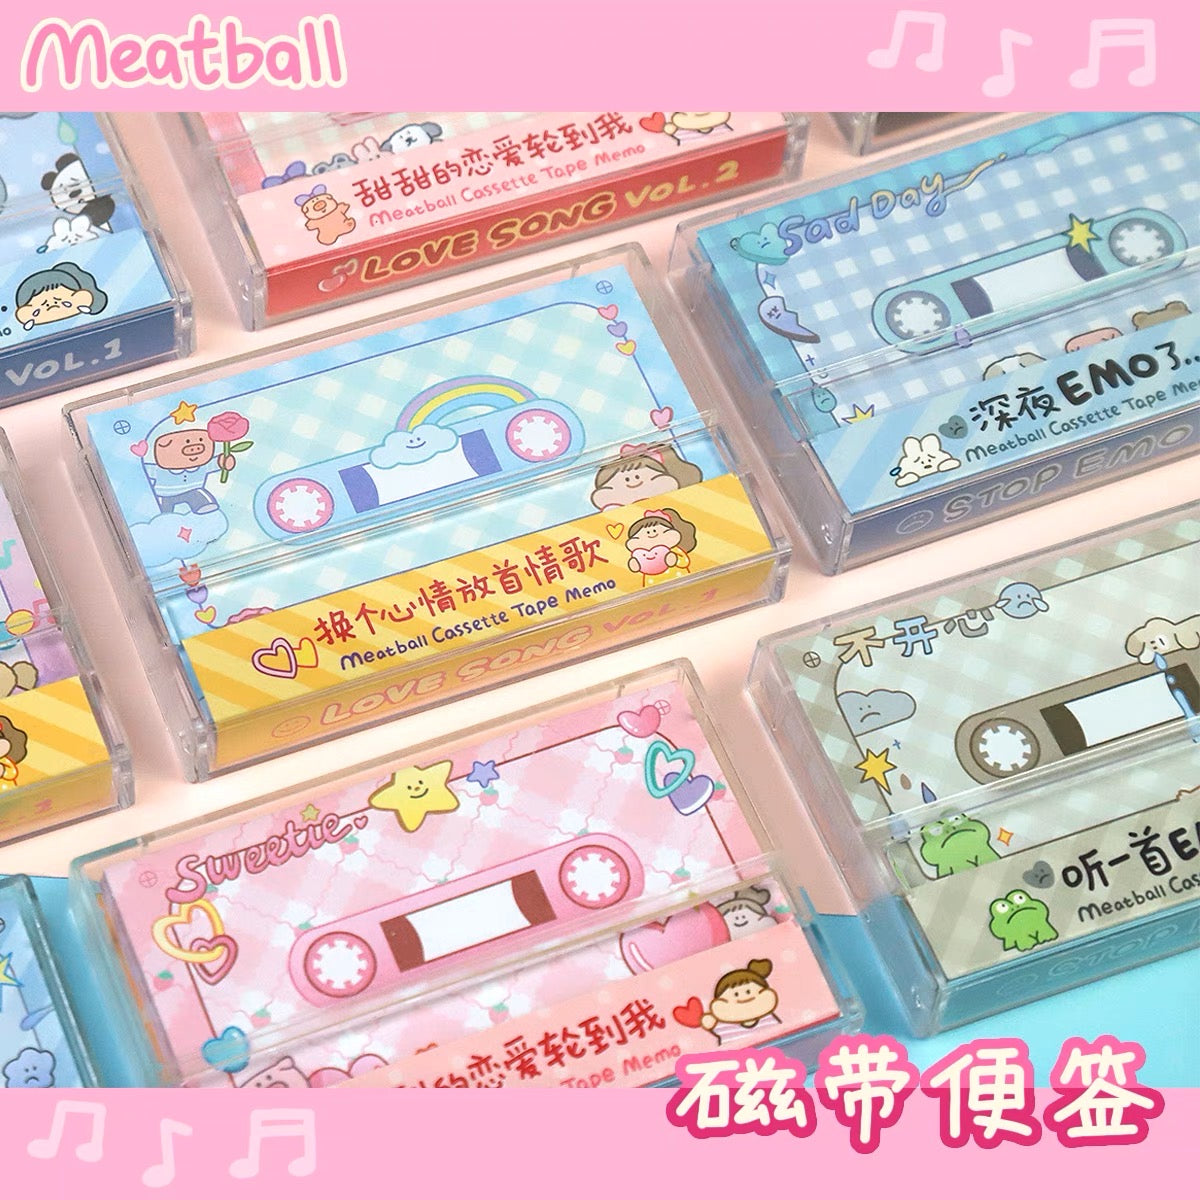 Meatball Love Song and Stop EMO cassette tape memo